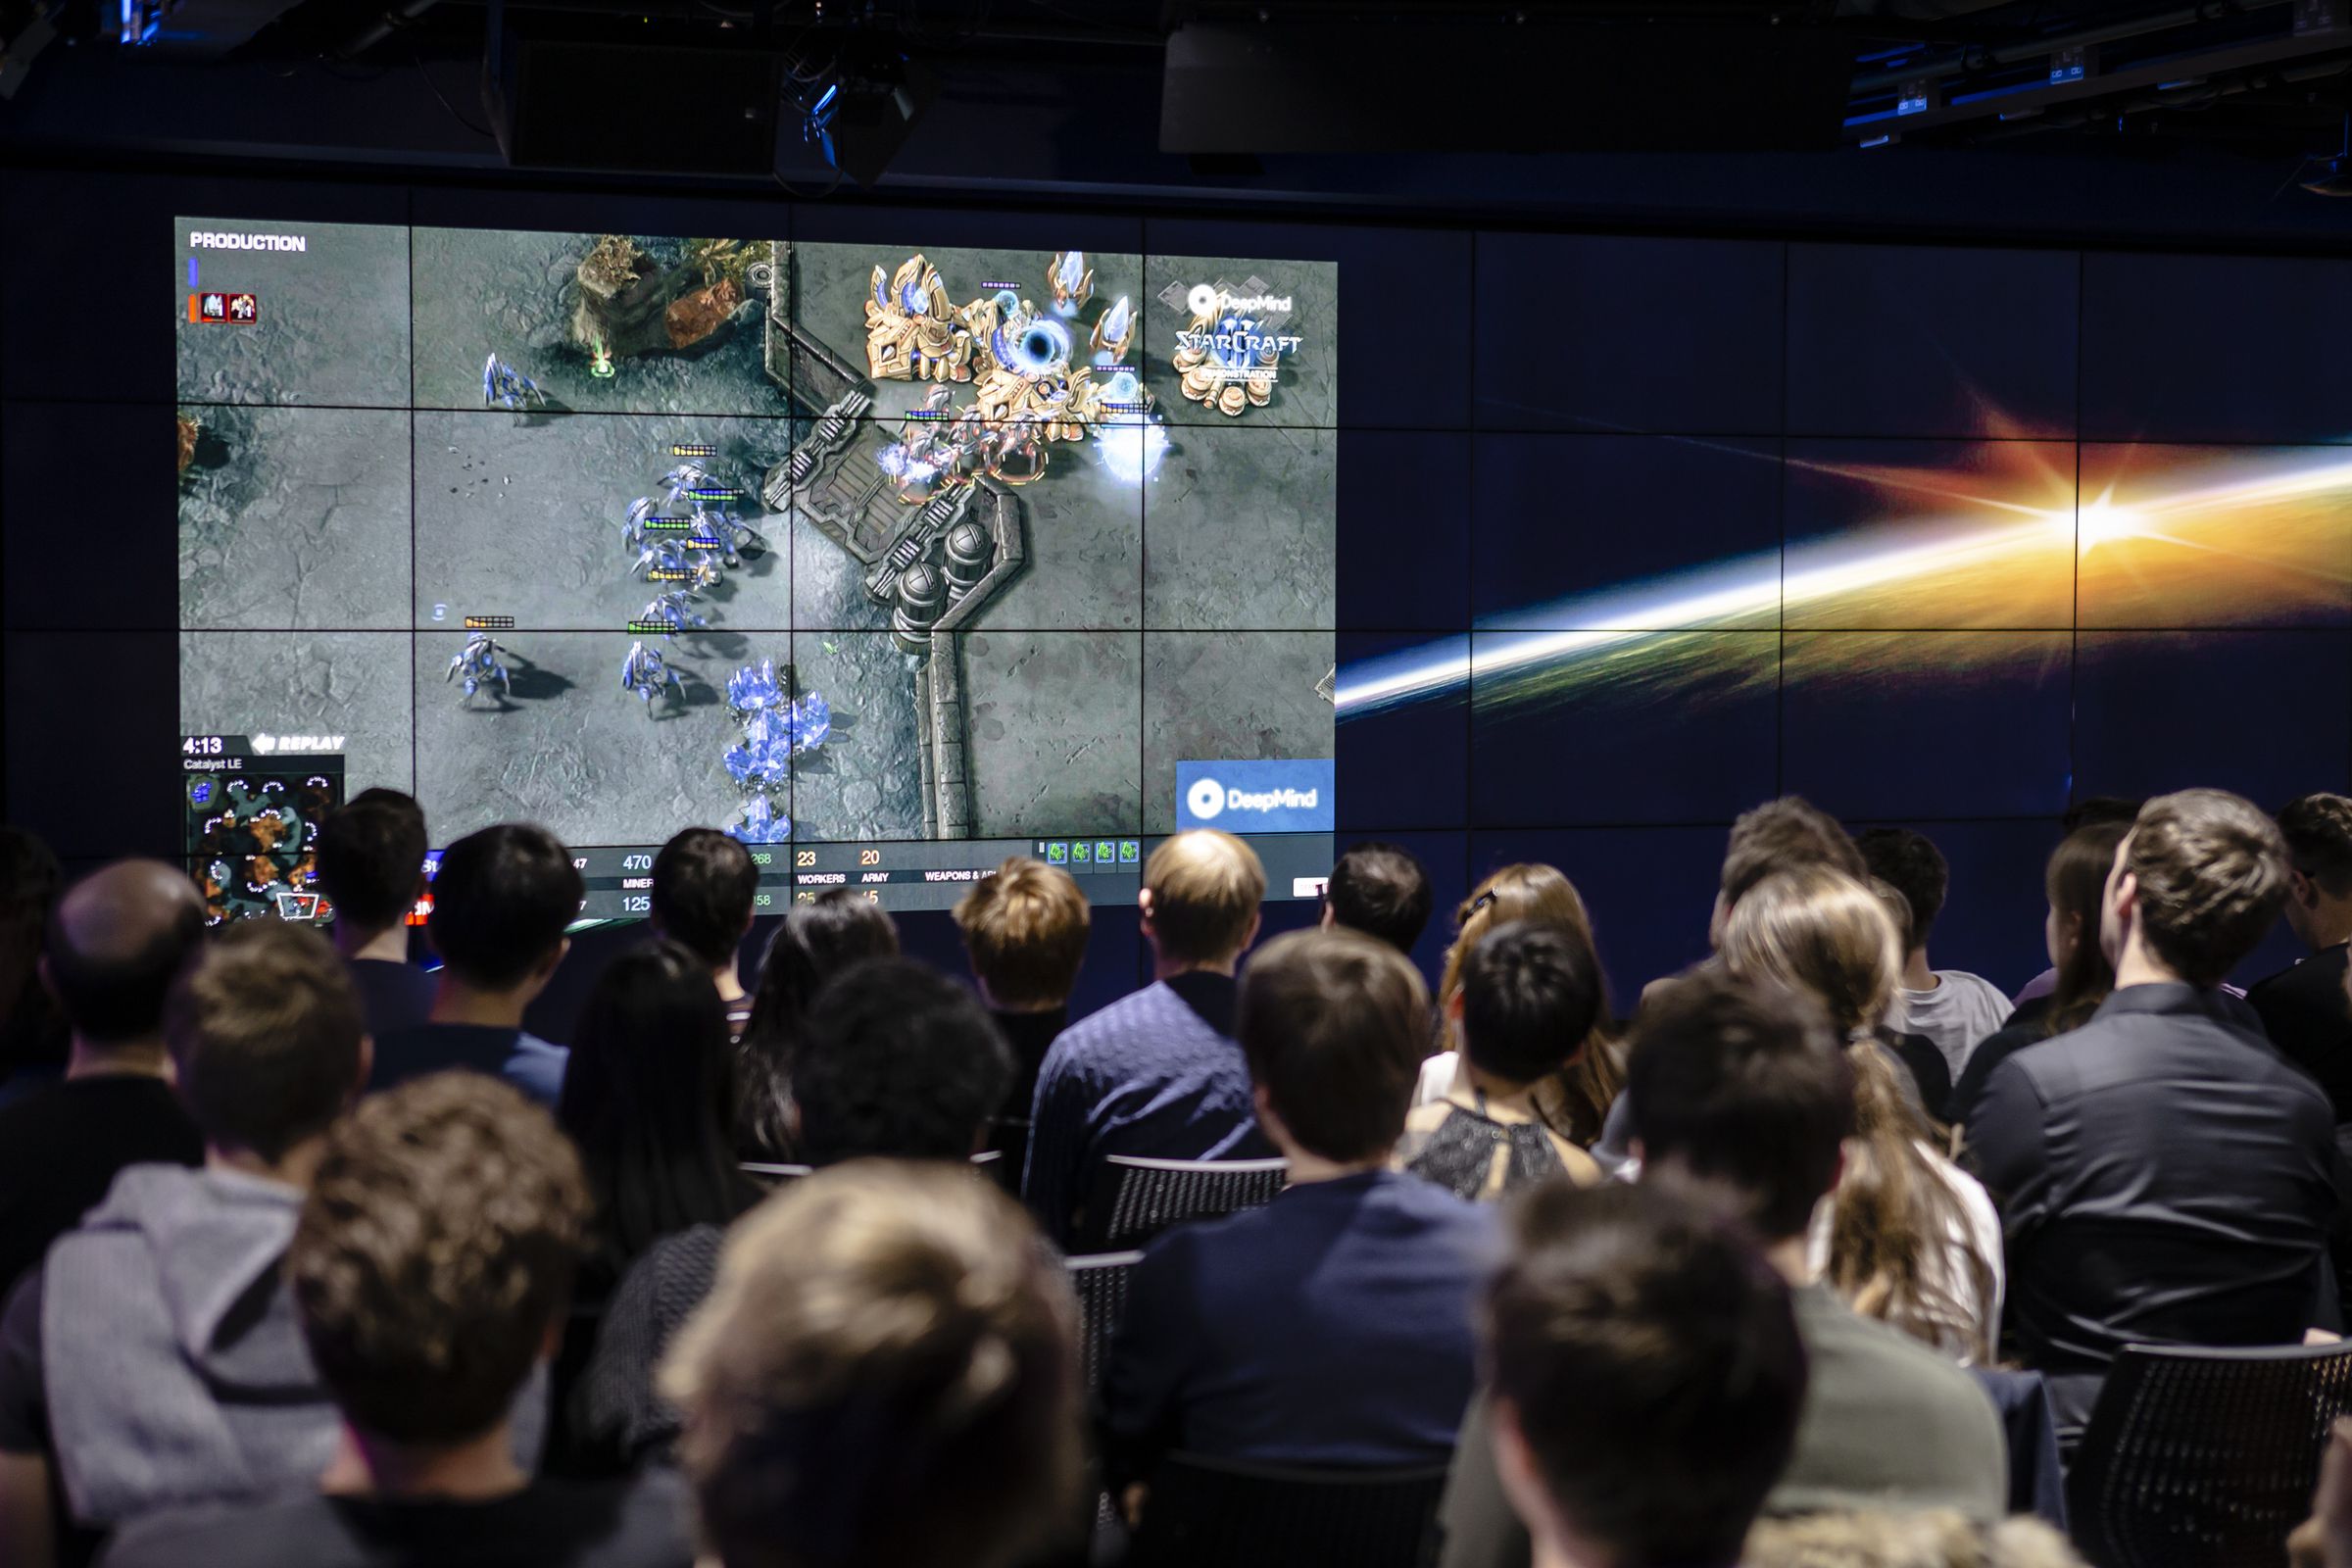 Researchers at AI lab DeepMind watch on as their AI AlphaStar tackles human players in StarCraft II.